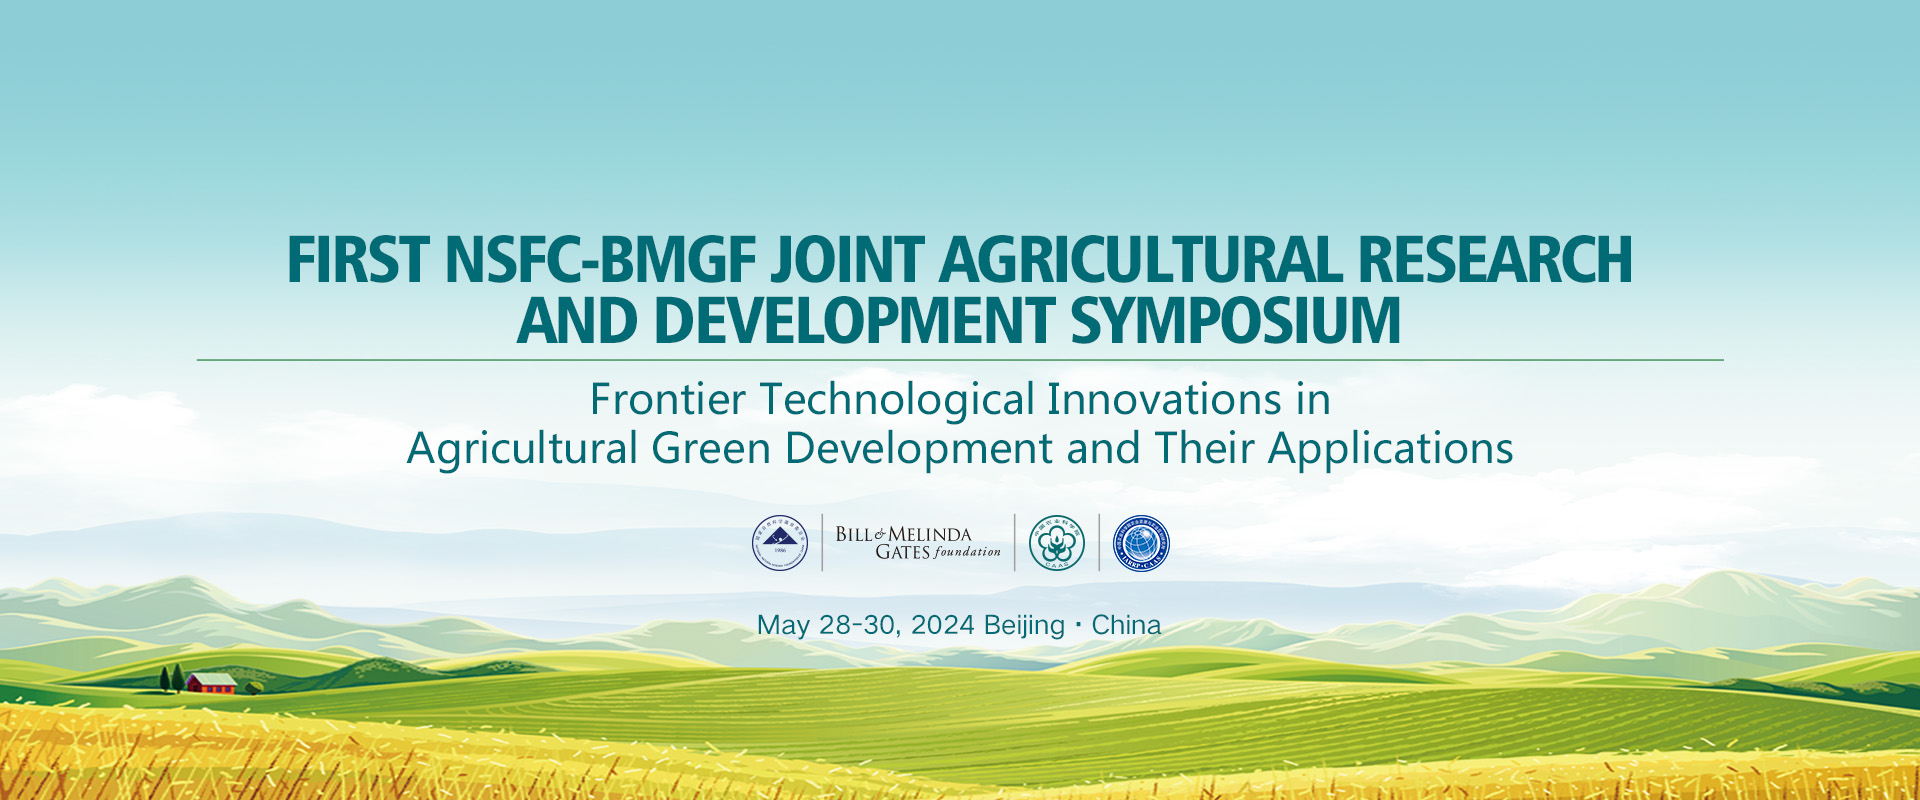 Announcement of the First NSFC-BMGF Joint Agricultural Research and Development Symposium (Second Notice)